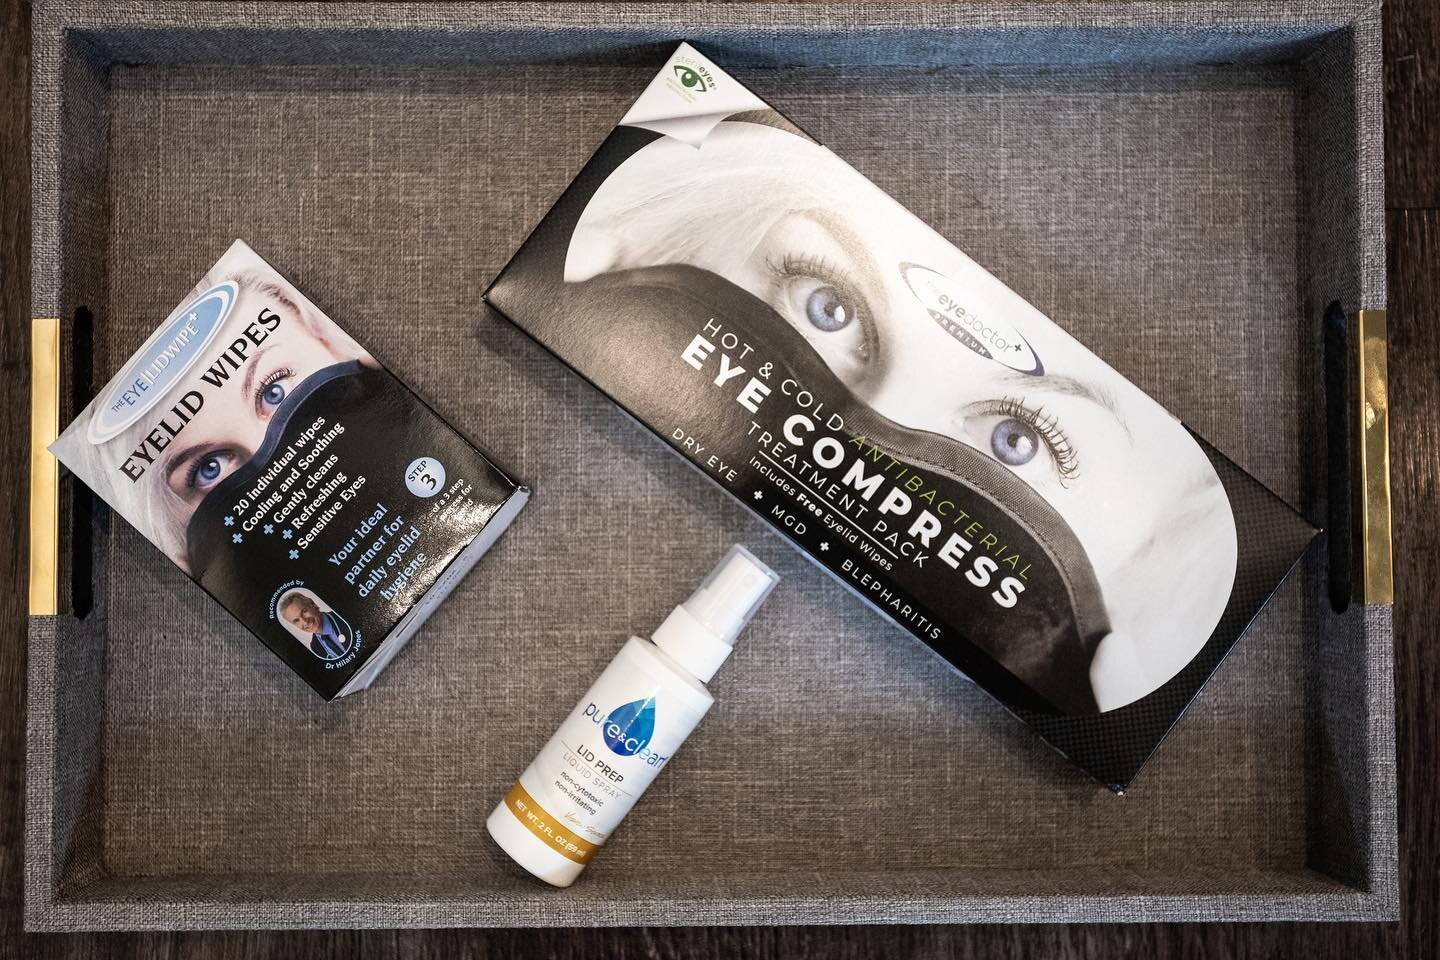 We got your essentials covered 👁✅

One of our most popular eye care products is our Eye Compress pack. This pack can be used warm or cold and helps ease the pain or discomfort caused by common eye problems.

Our eyelid wipes are designed to be gentl